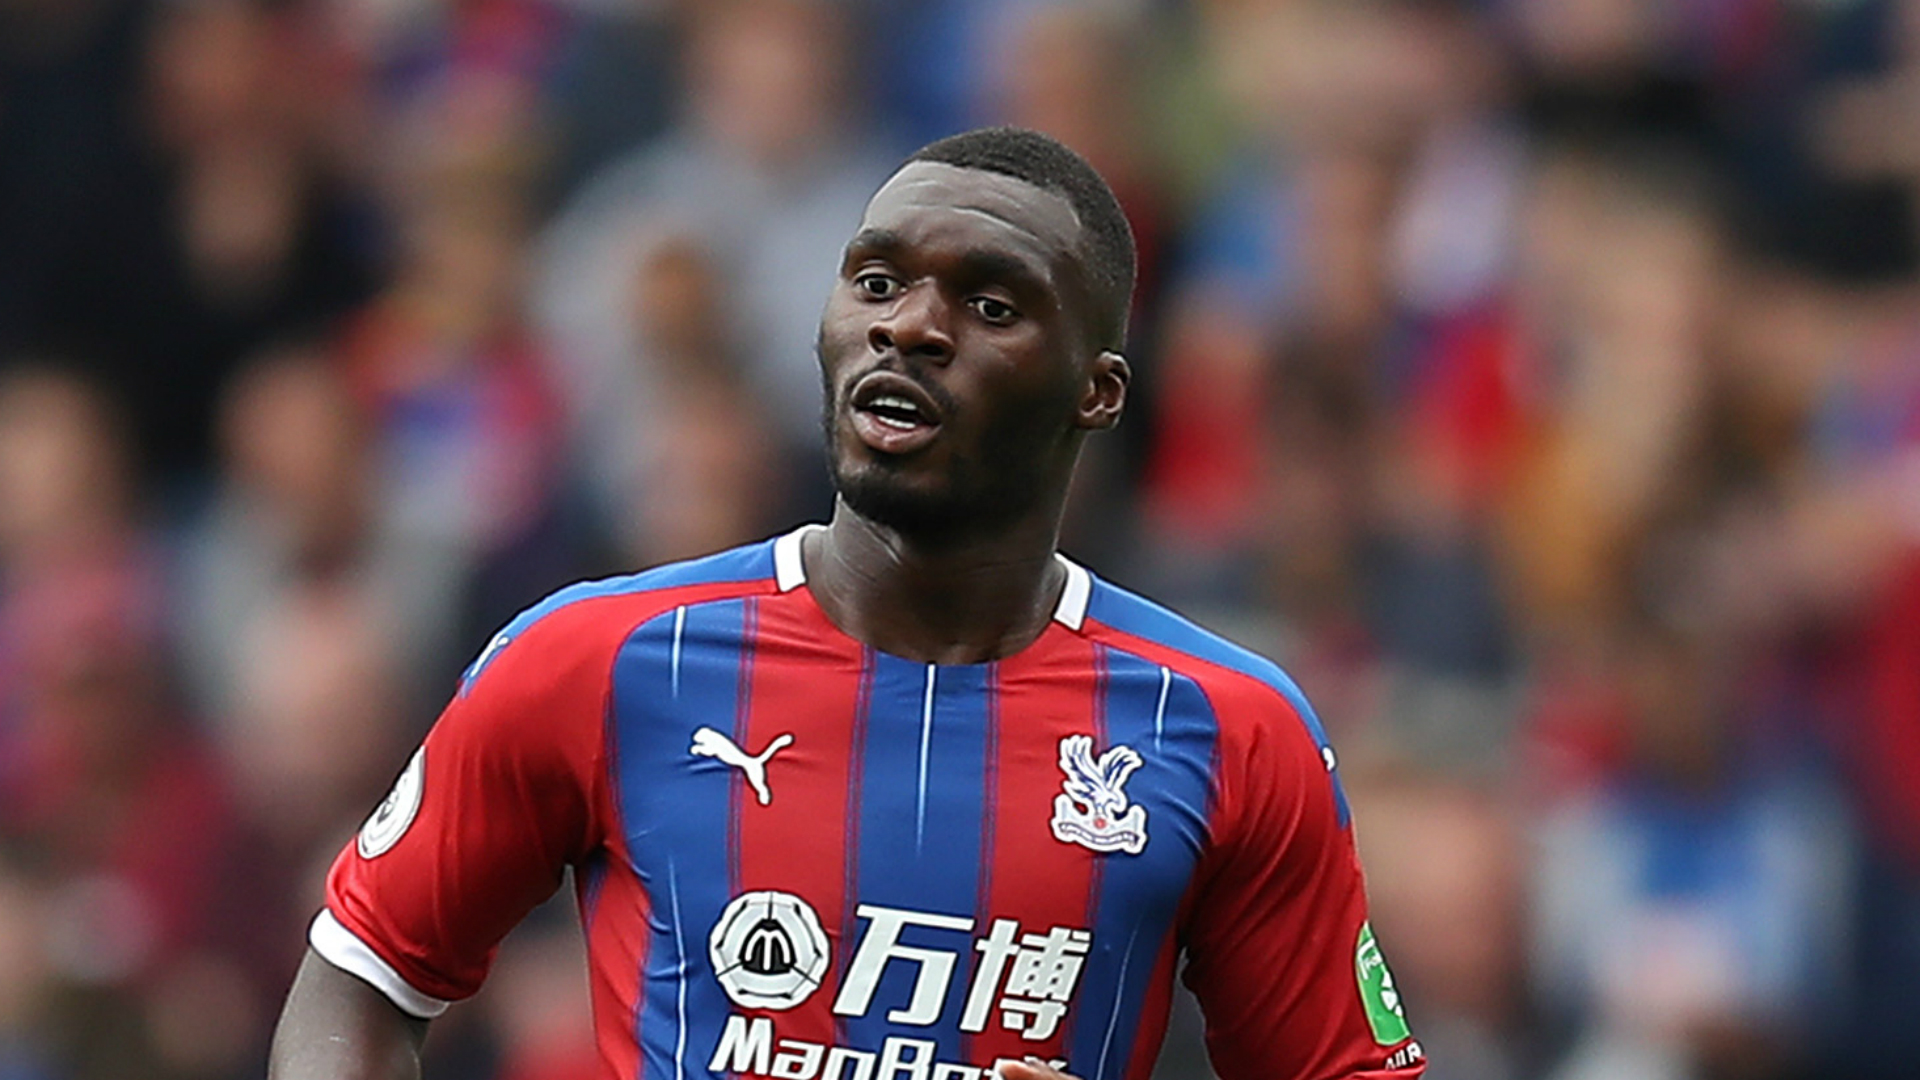 Crystal Palace have announced that experienced pair Christian Benteke and James Tomkins have extended their contracts at Selhurst Park.